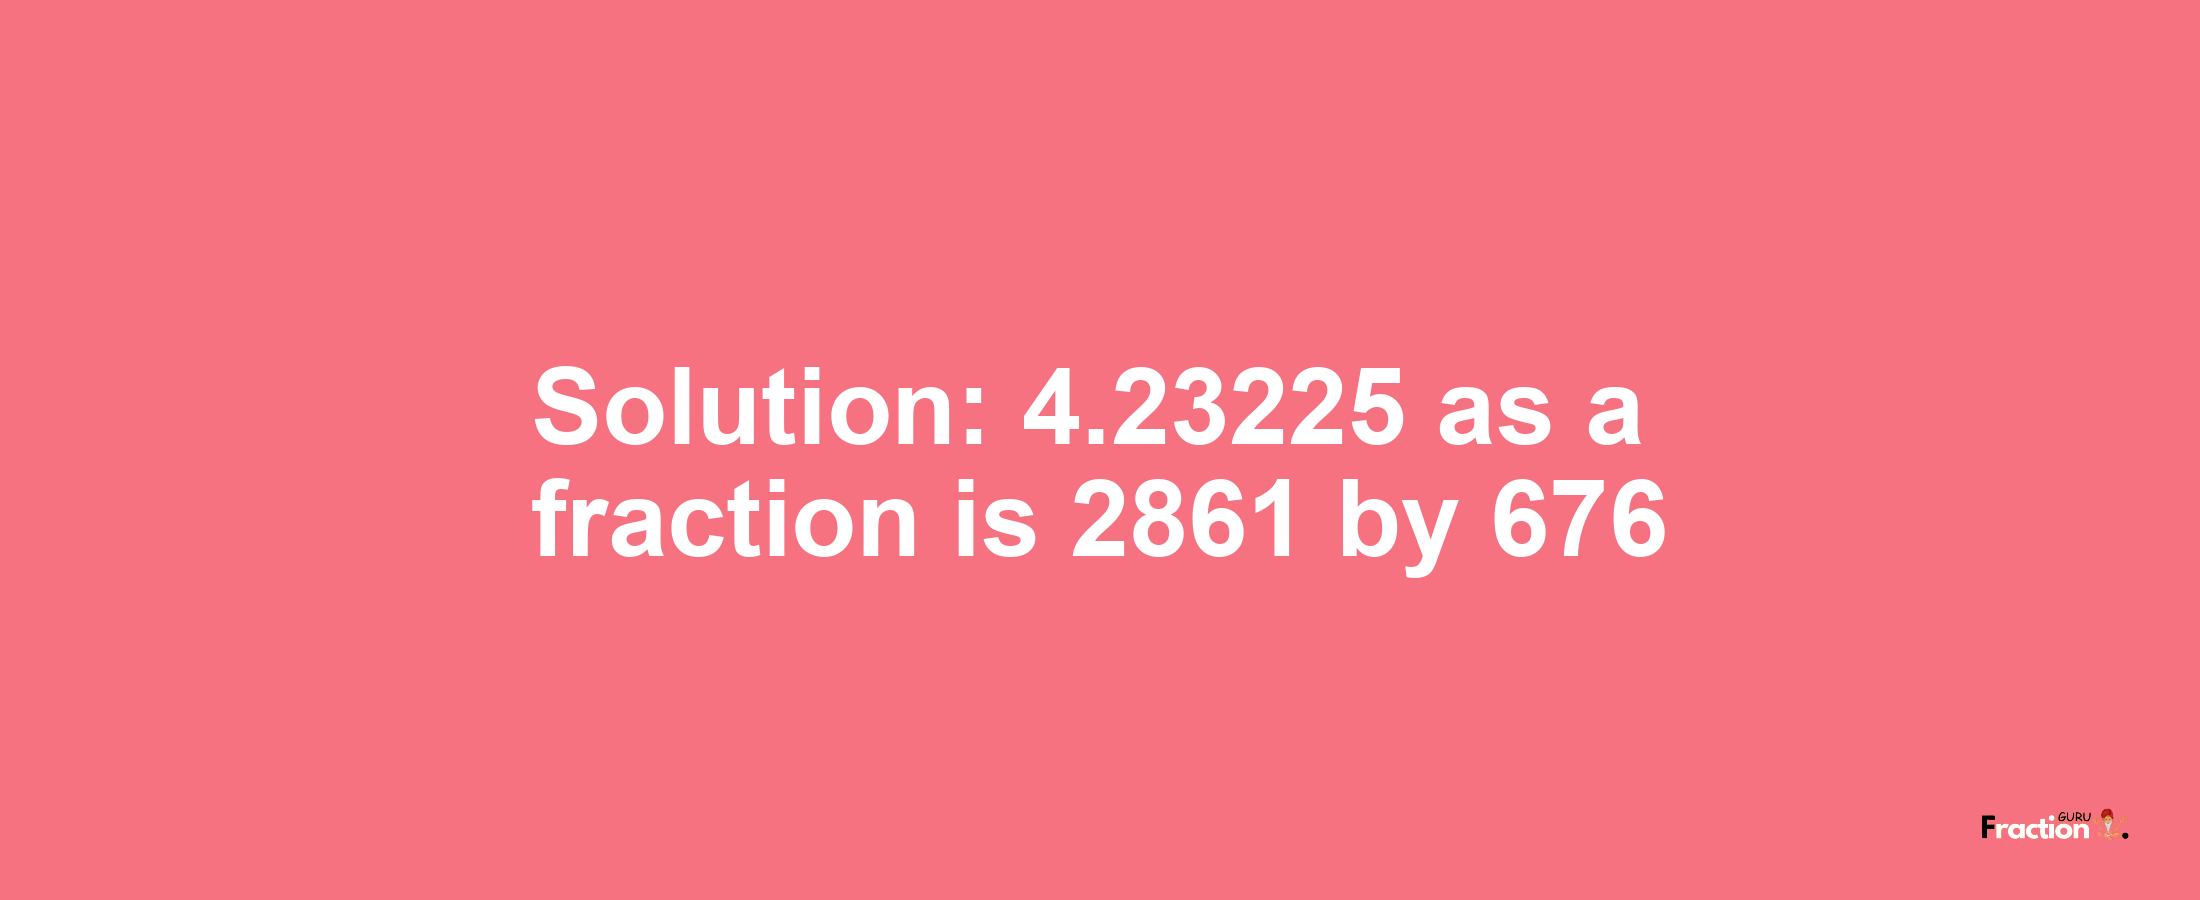 Solution:4.23225 as a fraction is 2861/676